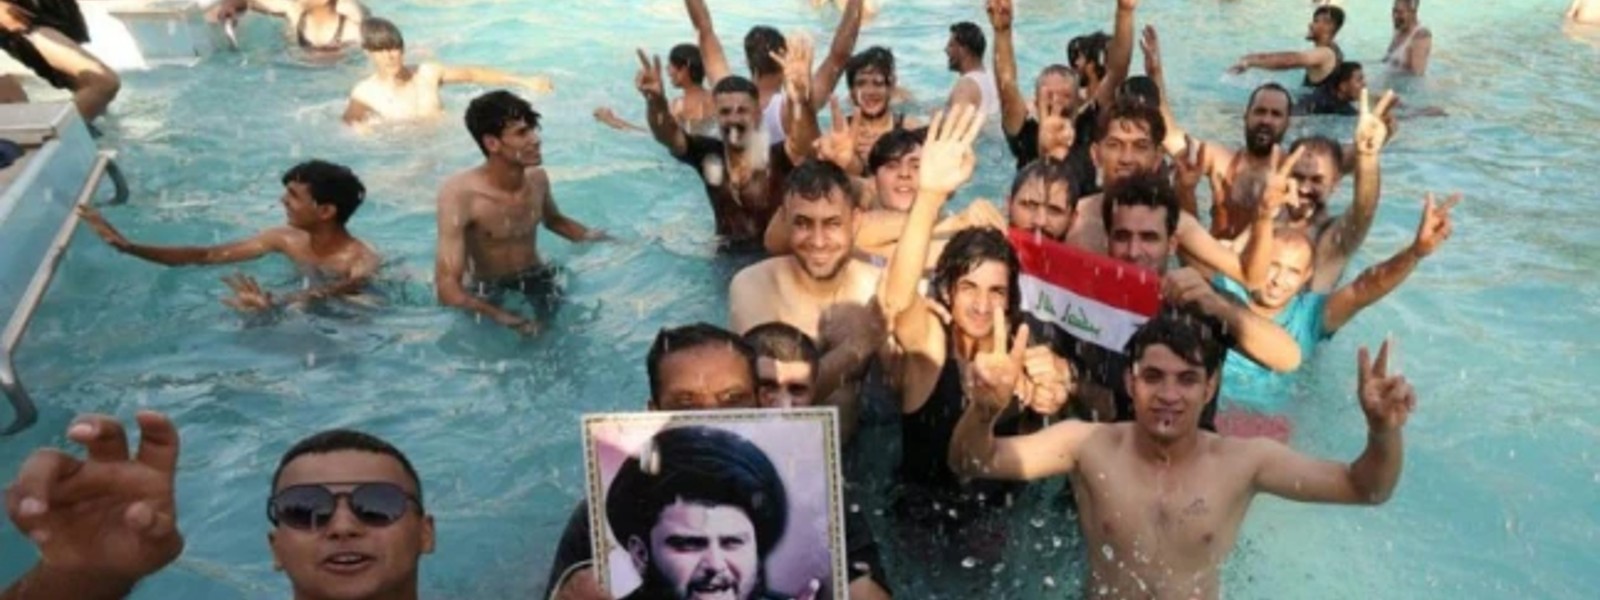 Sadr's fighters seized the pool of the Iraqi presidential palace